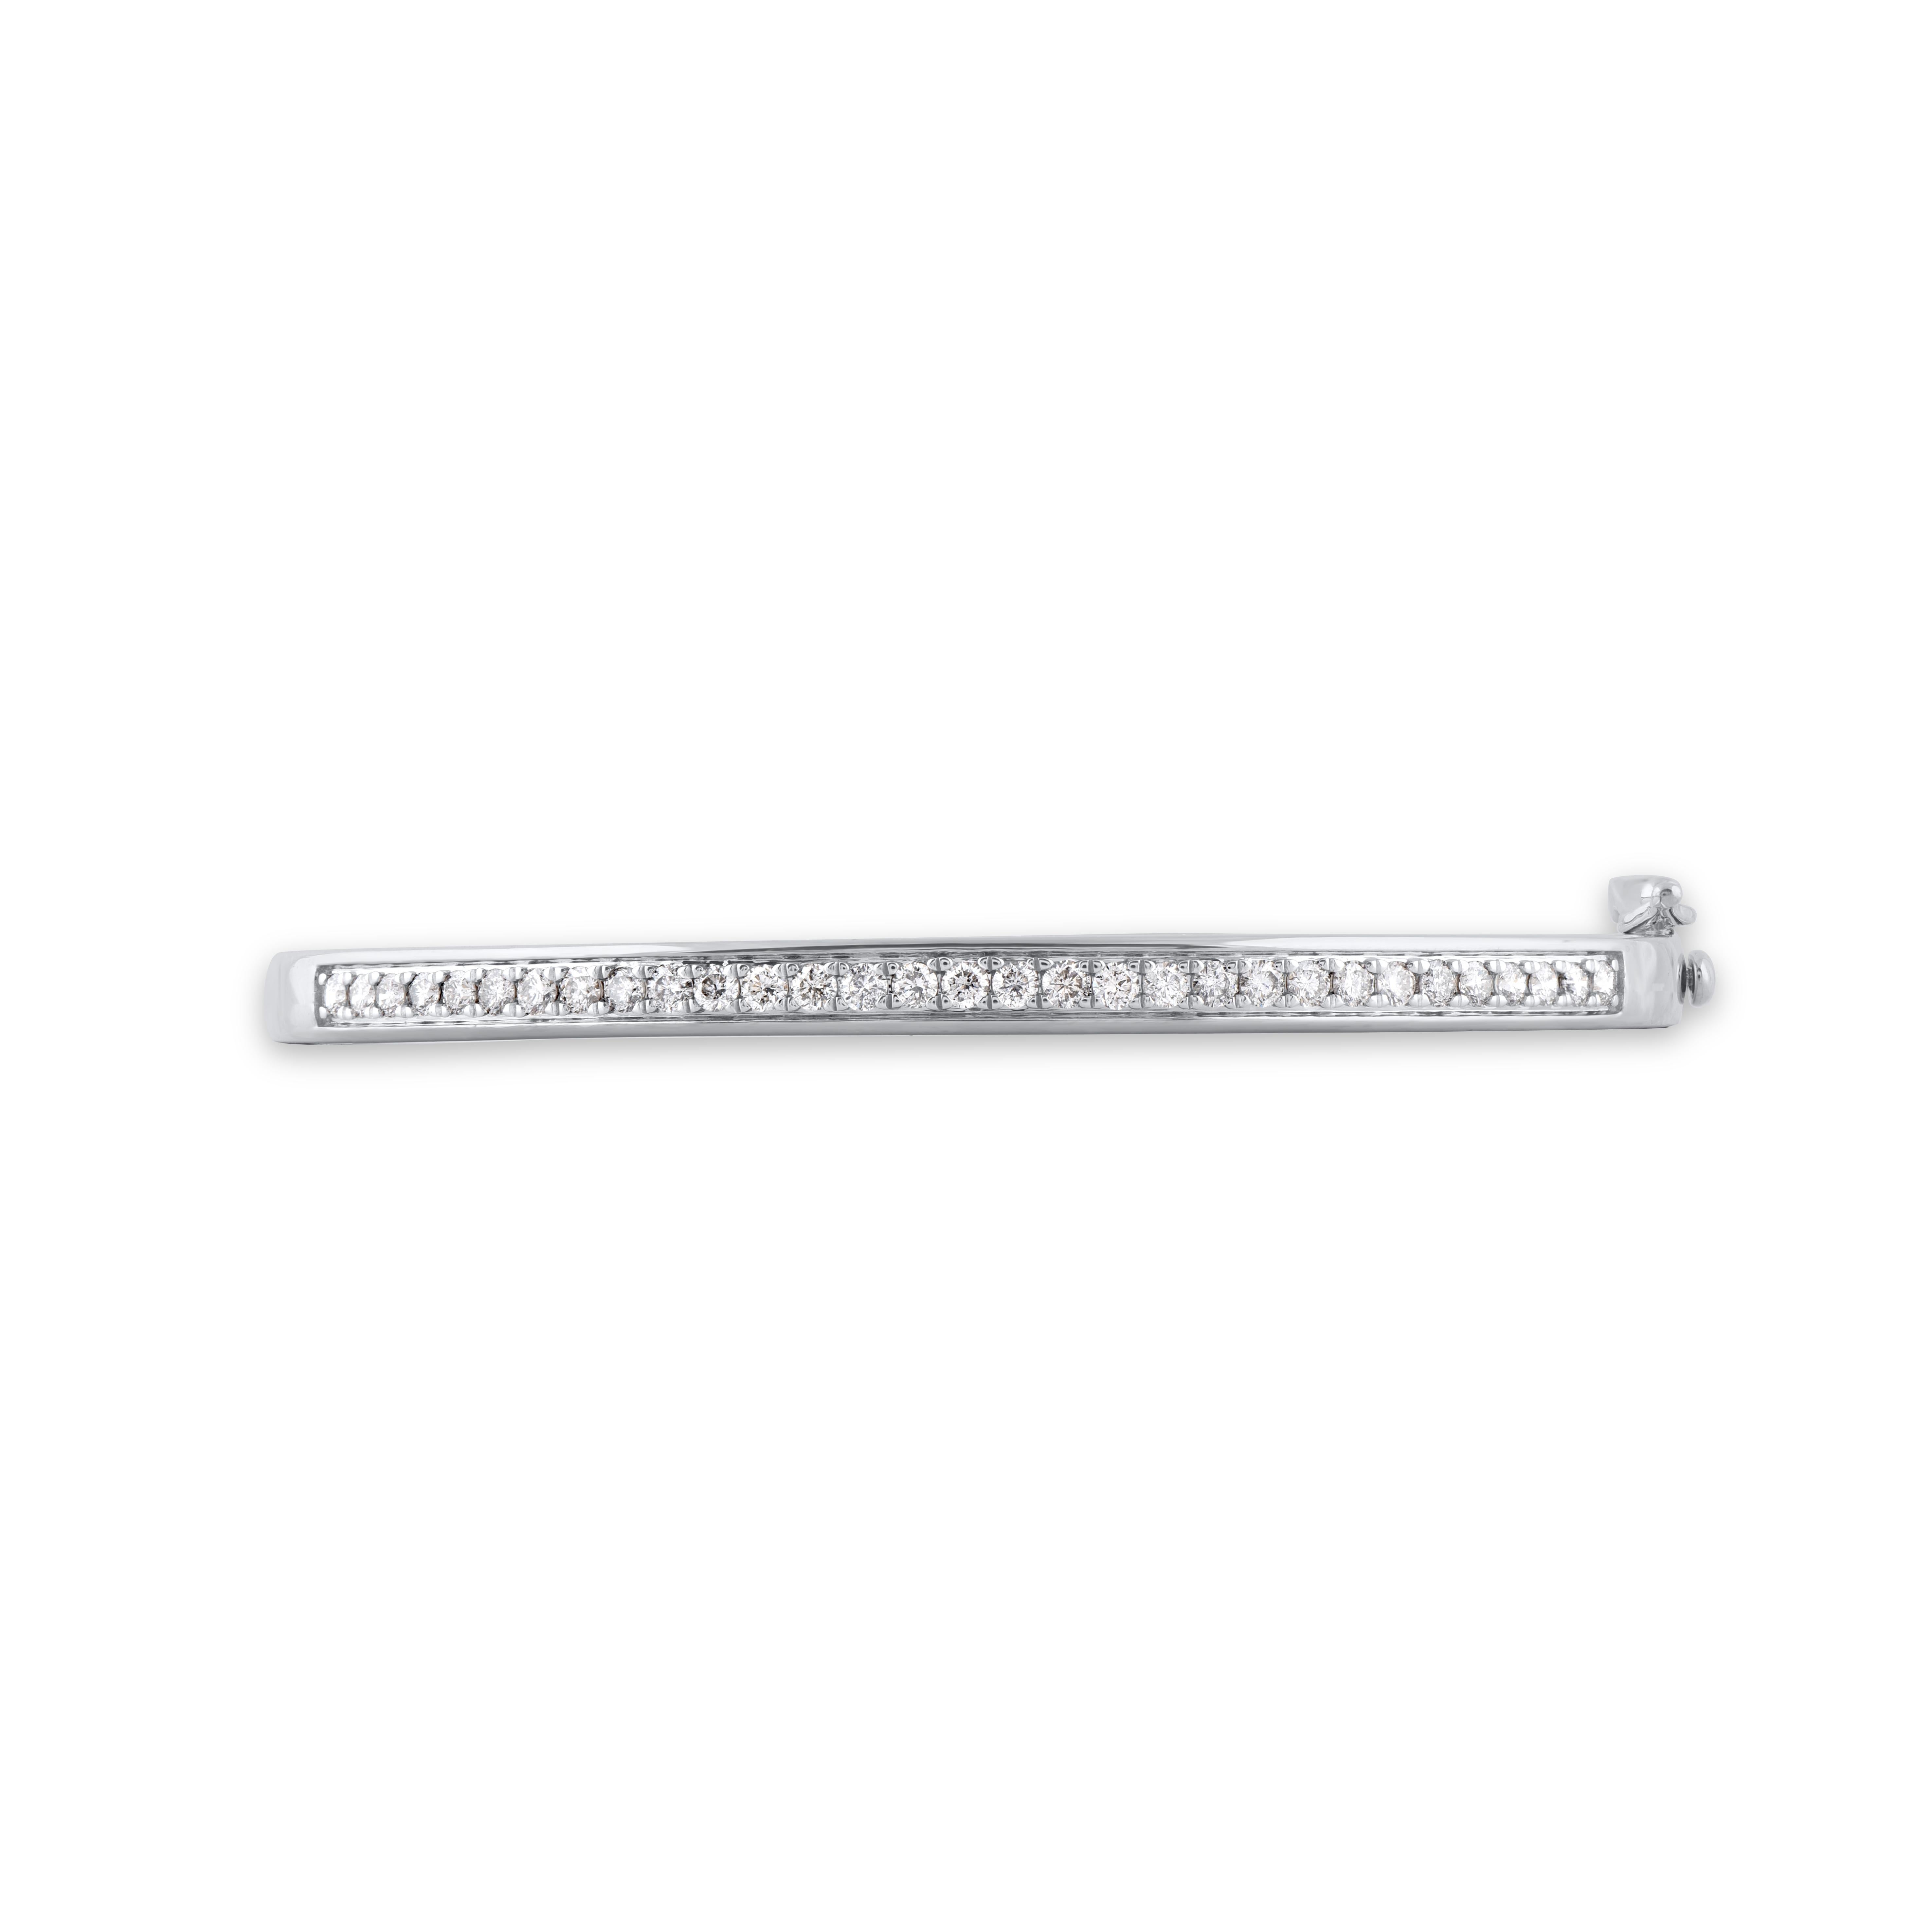 Express your sophisticated style with this gorgeous diamond bangle bracelet. This ring is beautifully crafted in 14 Karat white gold and embedded with 31 natural brilliant cut diamonds in pave setting. The total diamond weight is 1.0 carat. Diamonds